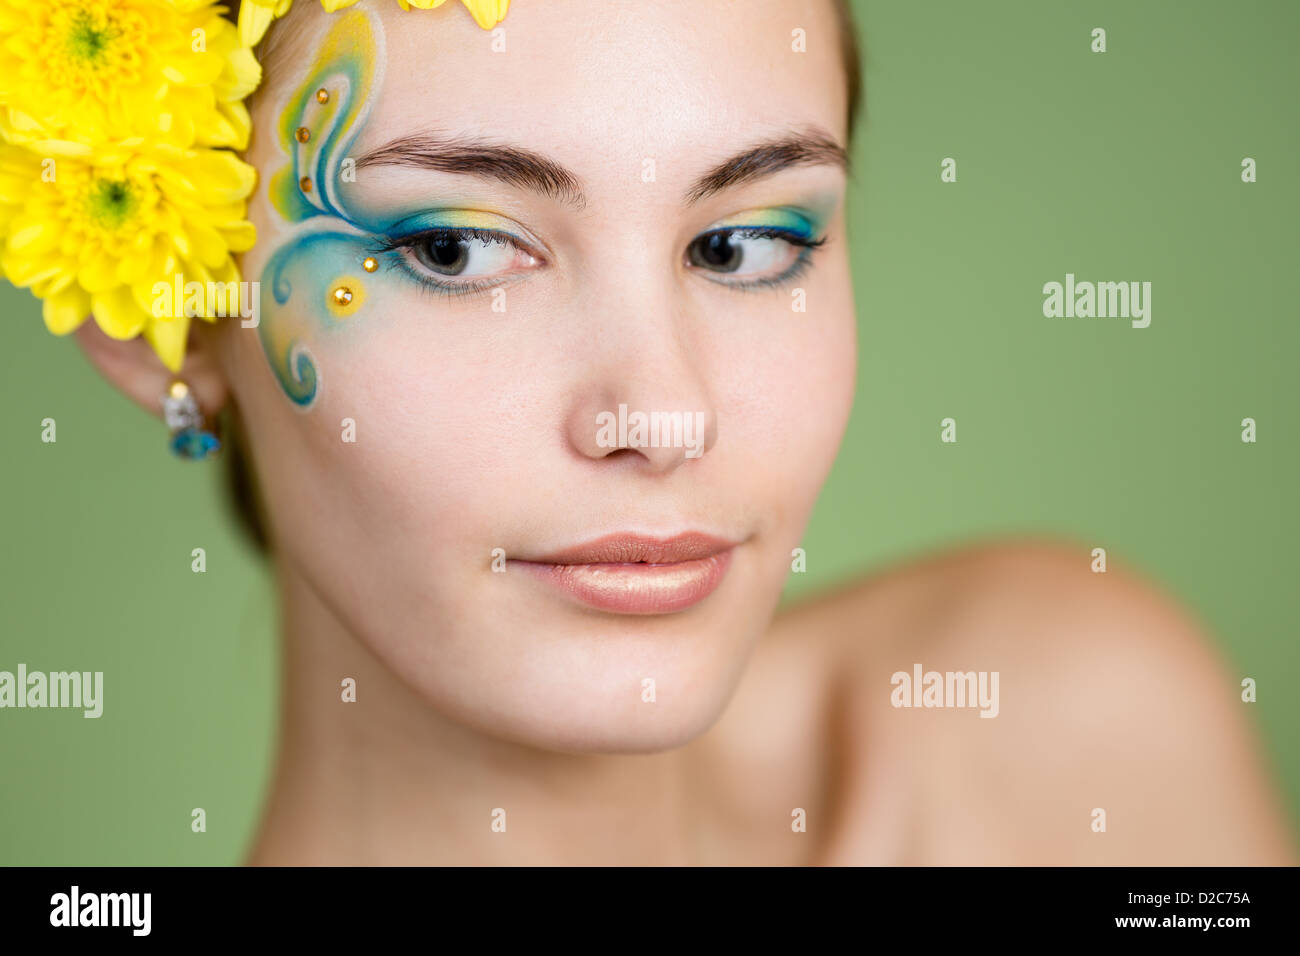 Young girl model with fantasy makeup and chrysanthemum flowers in her hair Stock Photo